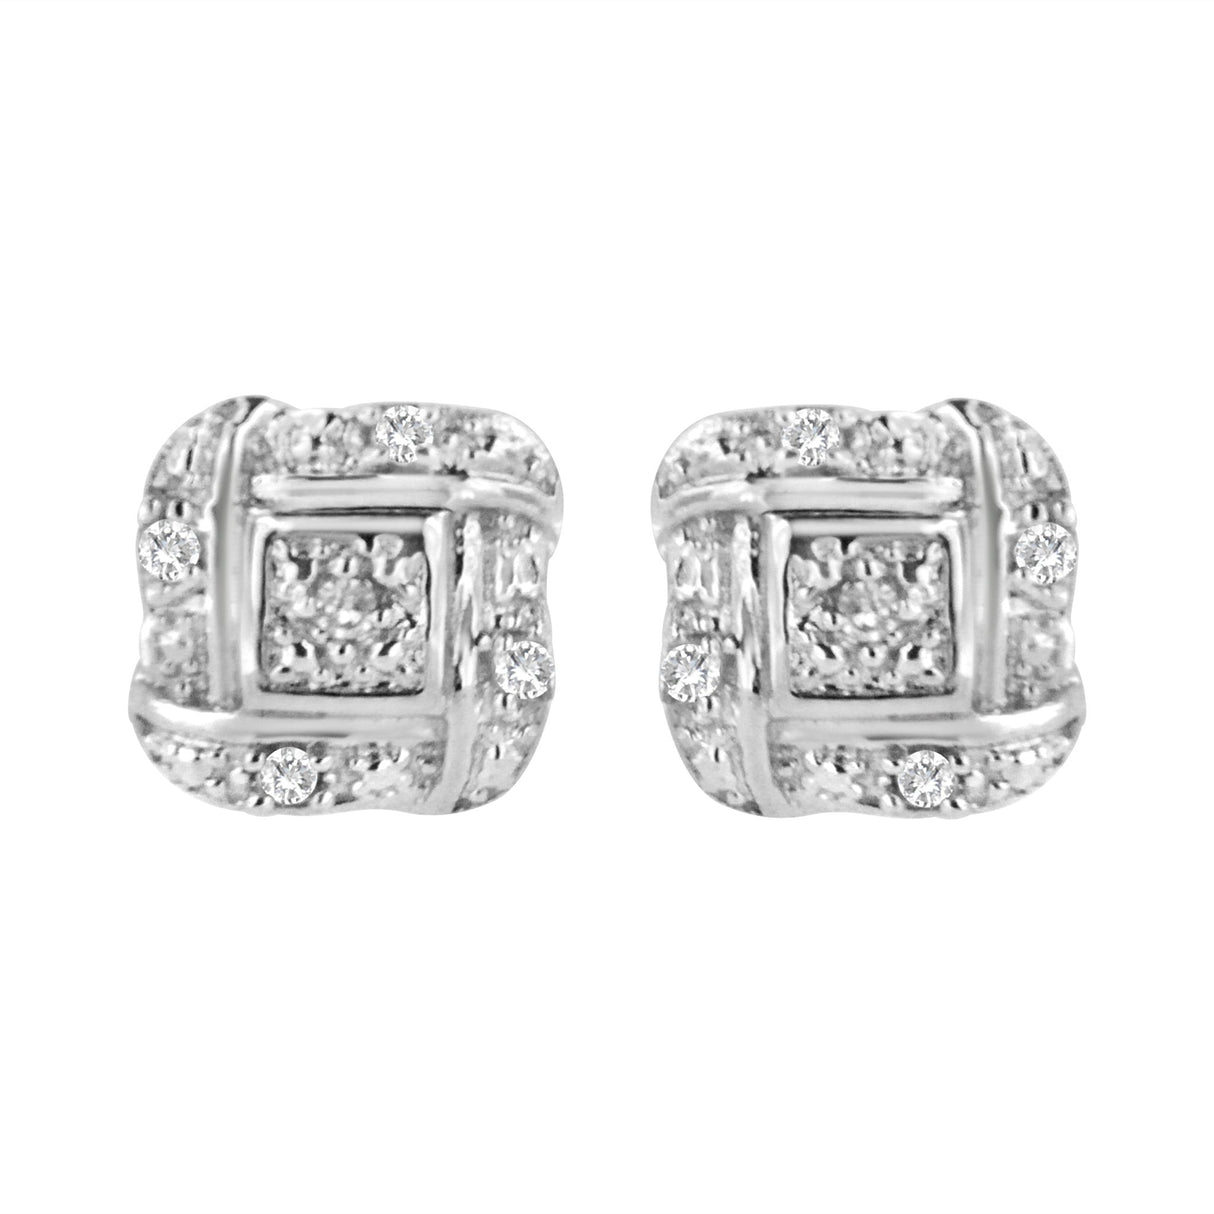 .925 Sterling Silver Round-Cut Diamond Accent Swirl Square Knot Stud Earrings (H-I Color, I2-I3 Clarity) - Tuesday Morning-Stud Earrings